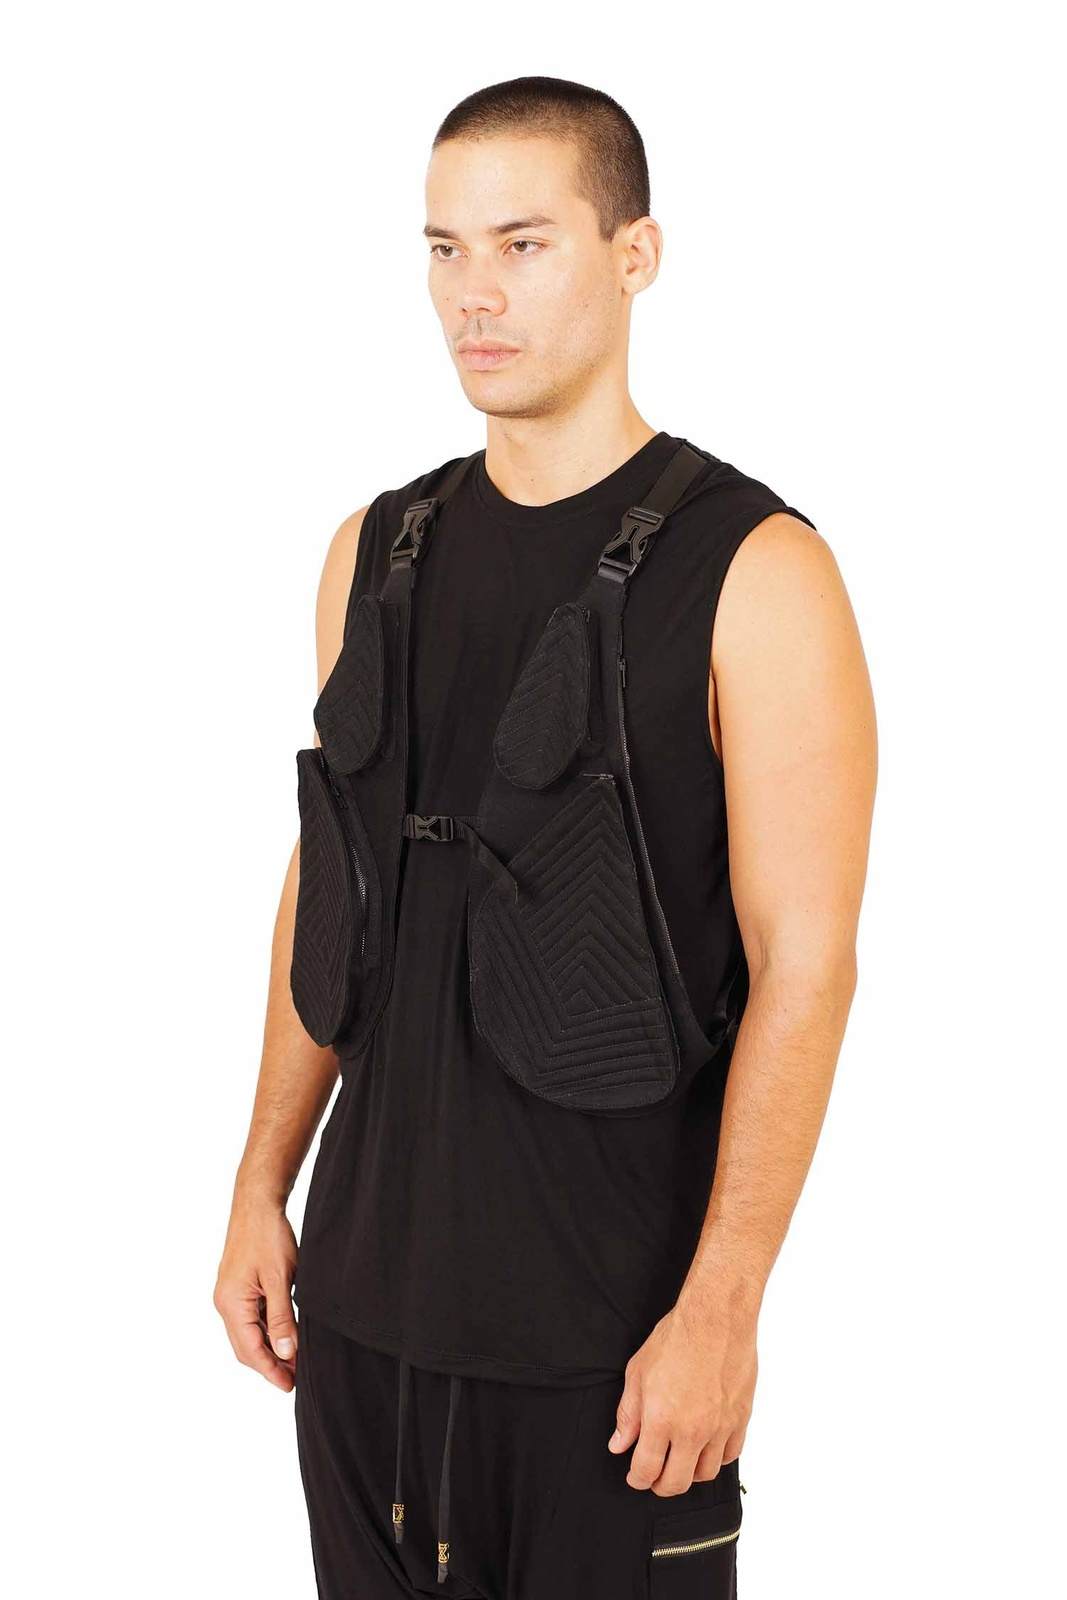 man wearing a black tactical vest from Love Khaos.